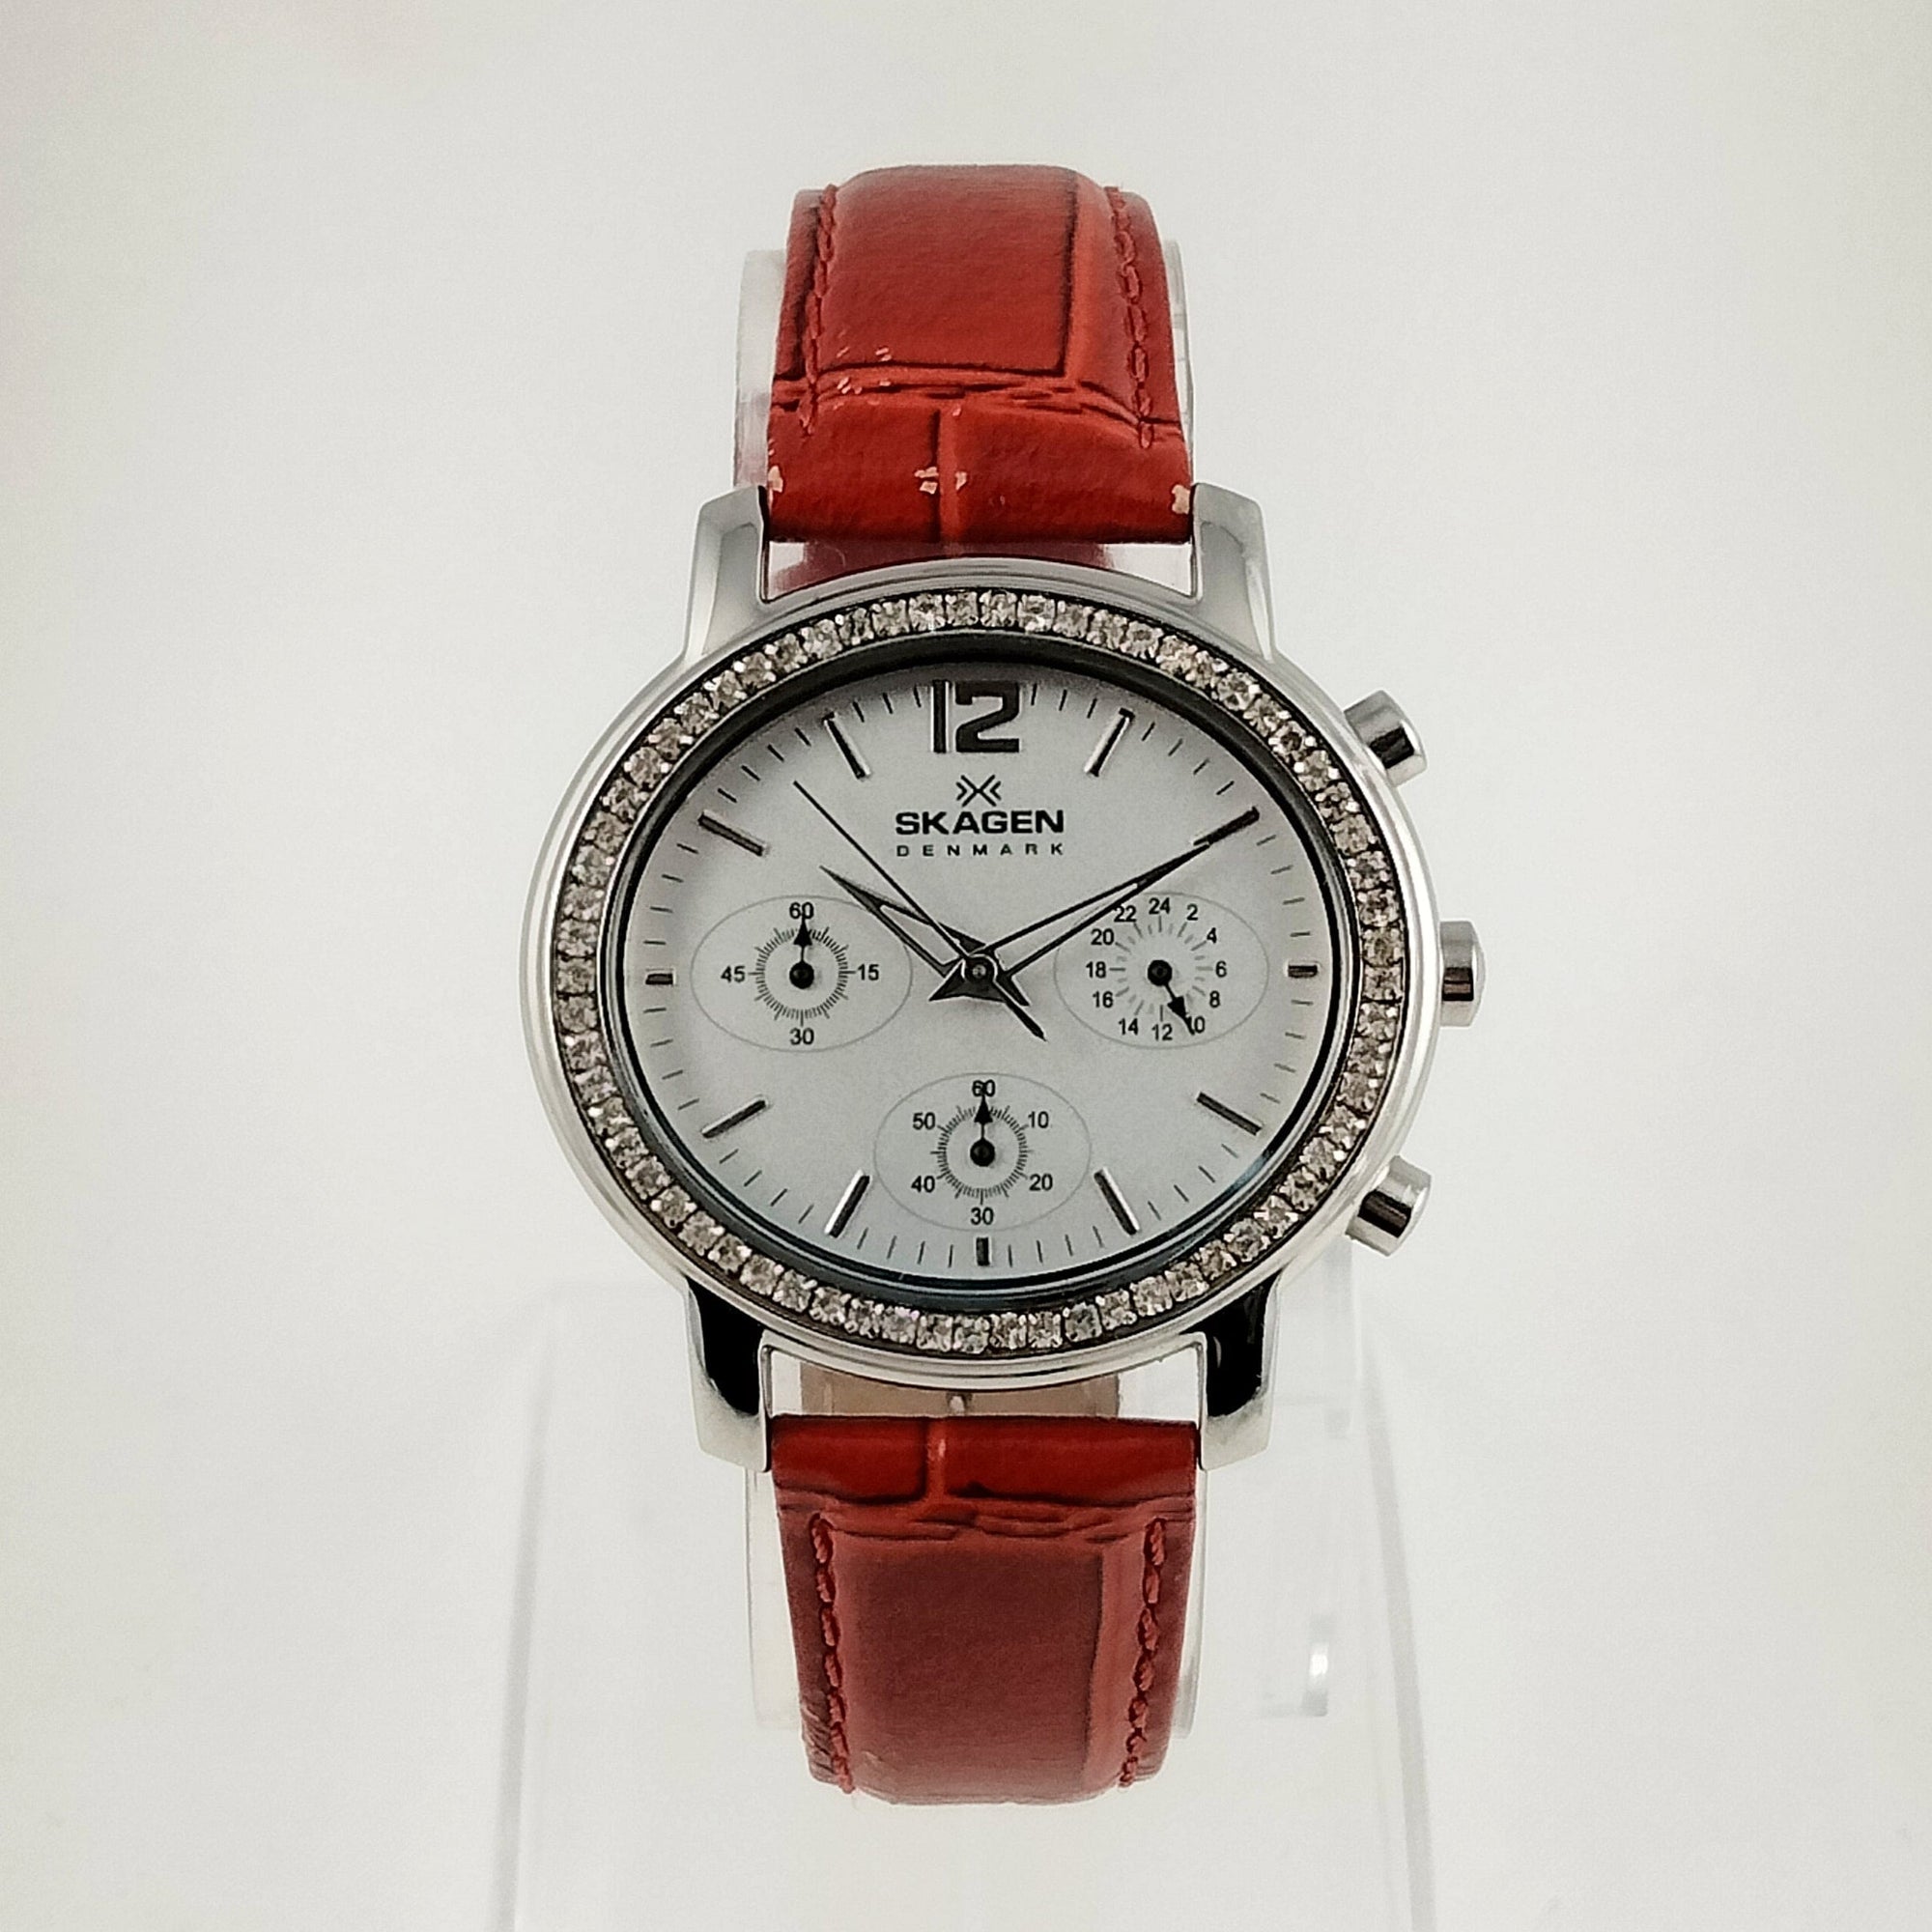 I Like Mikes Mid Century Modern Watches Skagen Women's Stainless Steel Chronograph Watch, Jewel Framed Face, Red Genuine Leather Strap